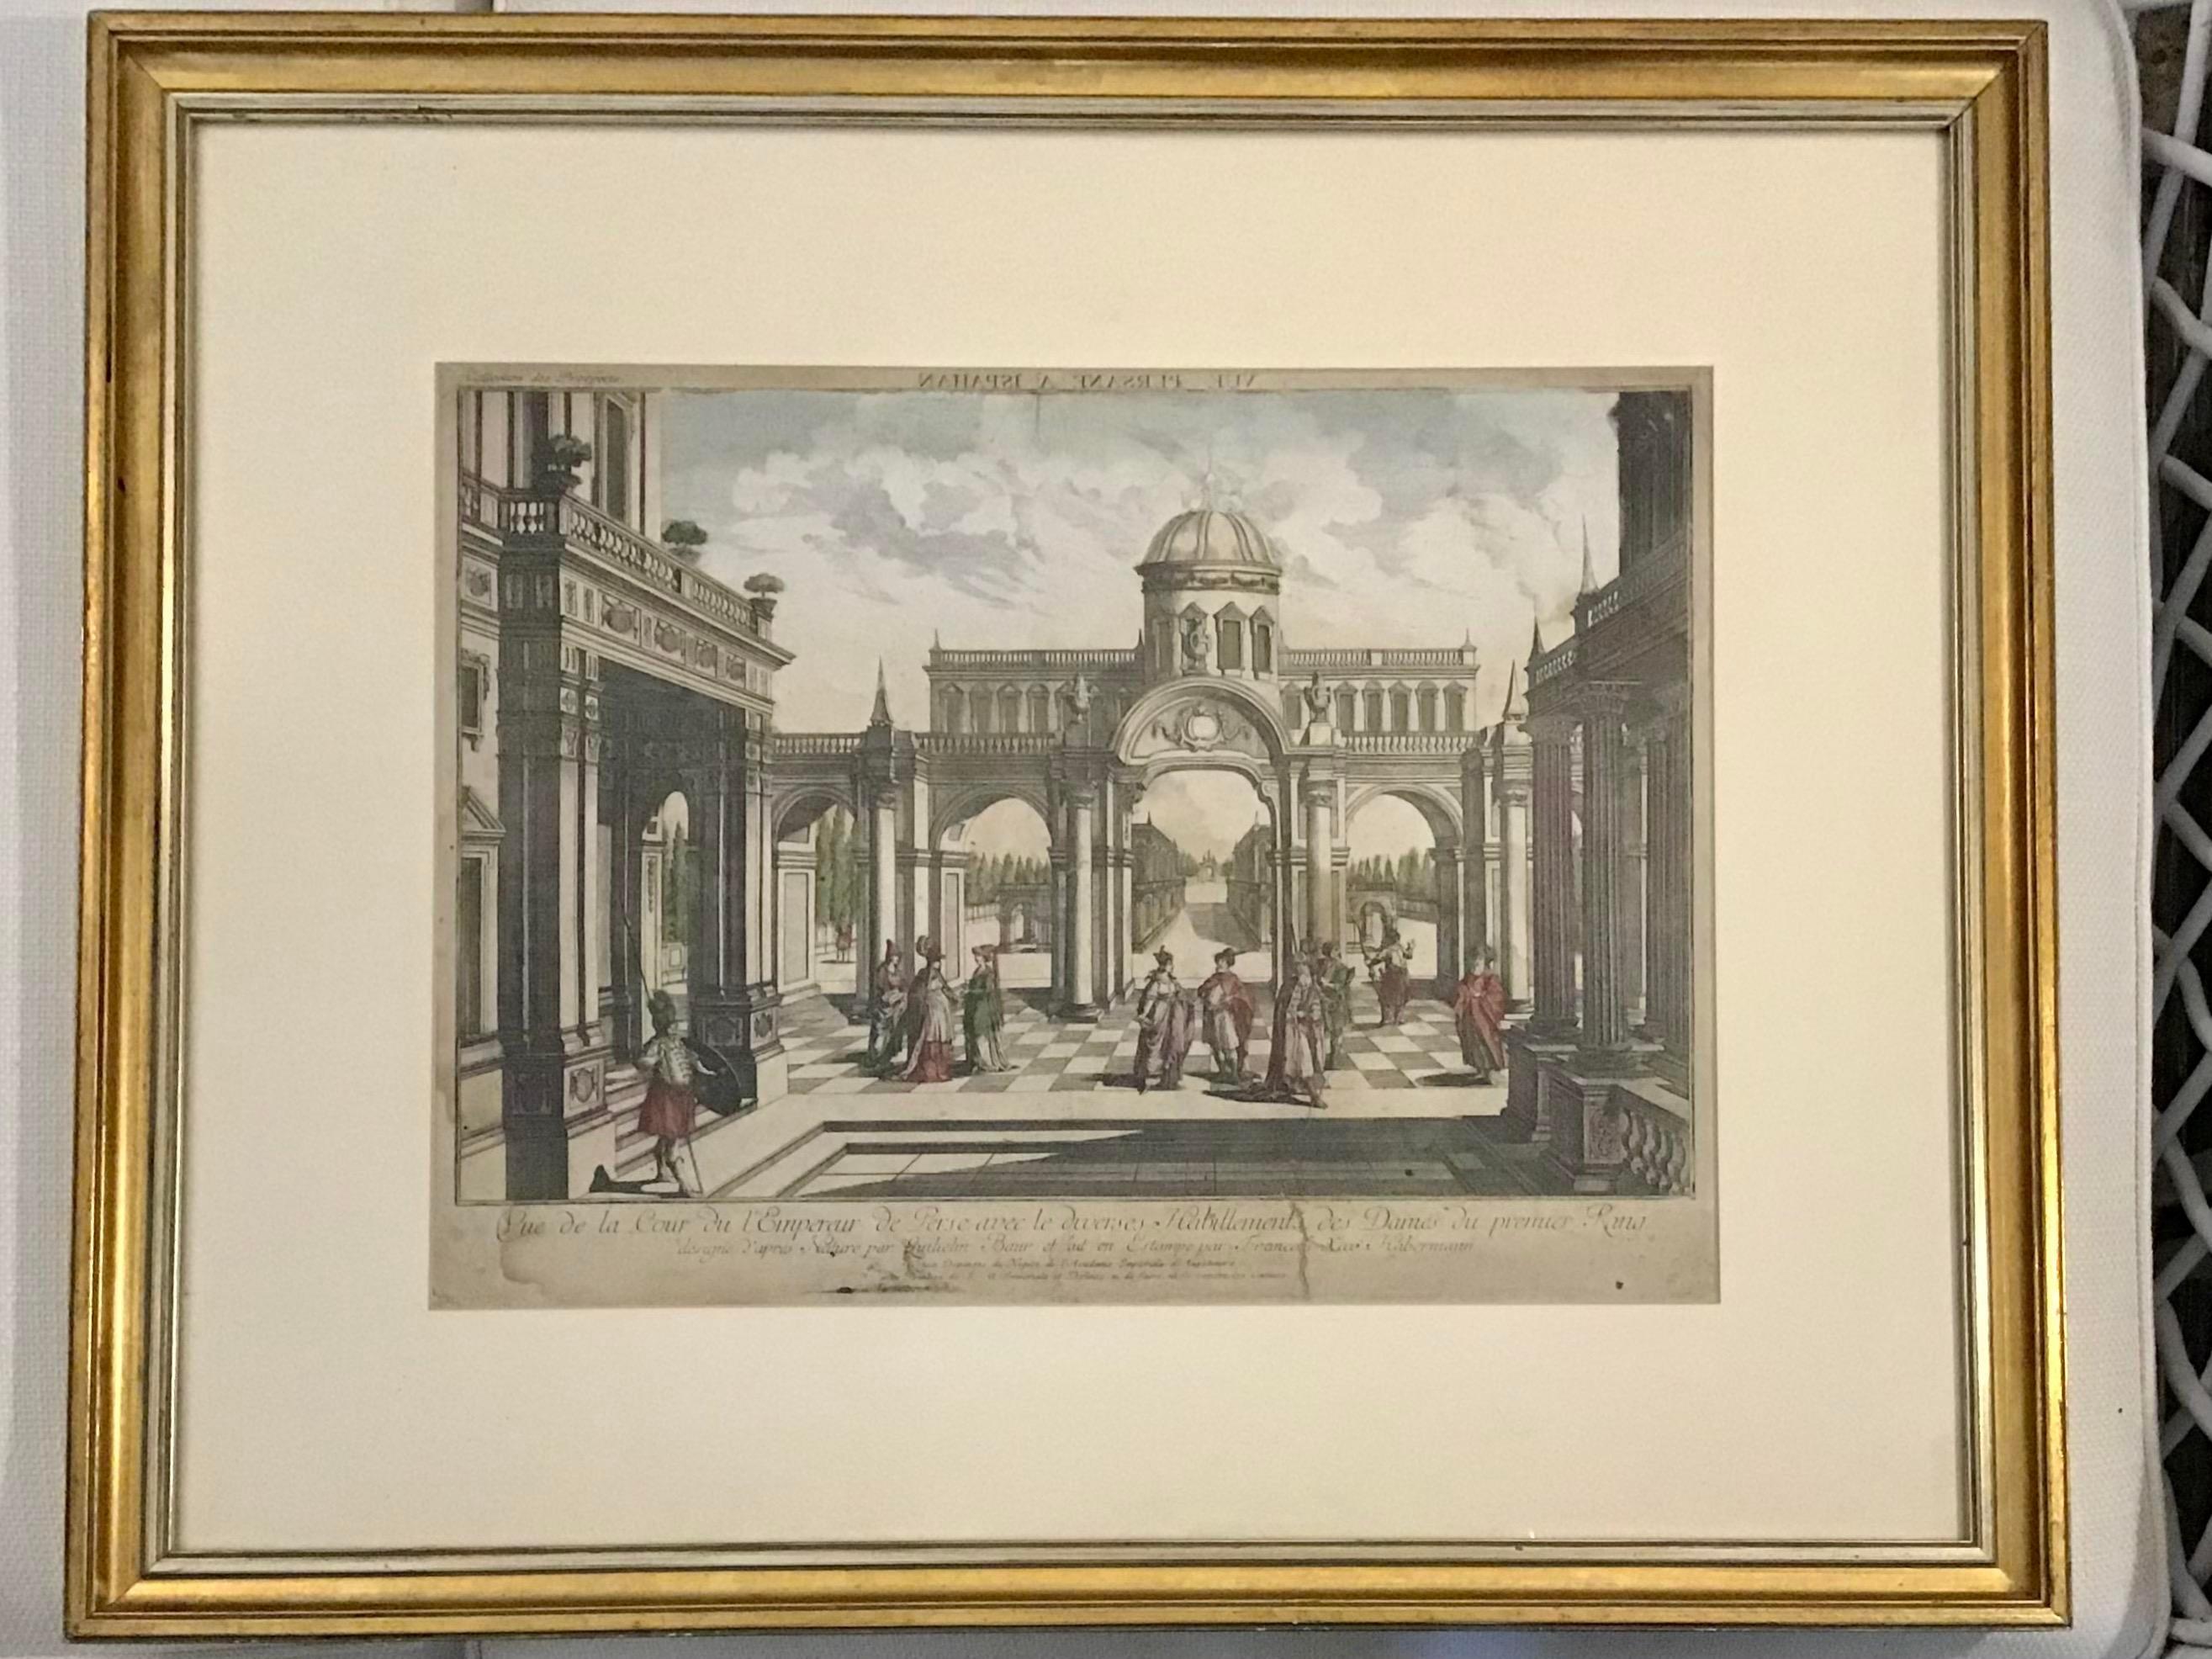 Gorgeous French 18th century etching of an architectural scene with watercolor details. Add some classic architecture to your home, very nice gild frame also.